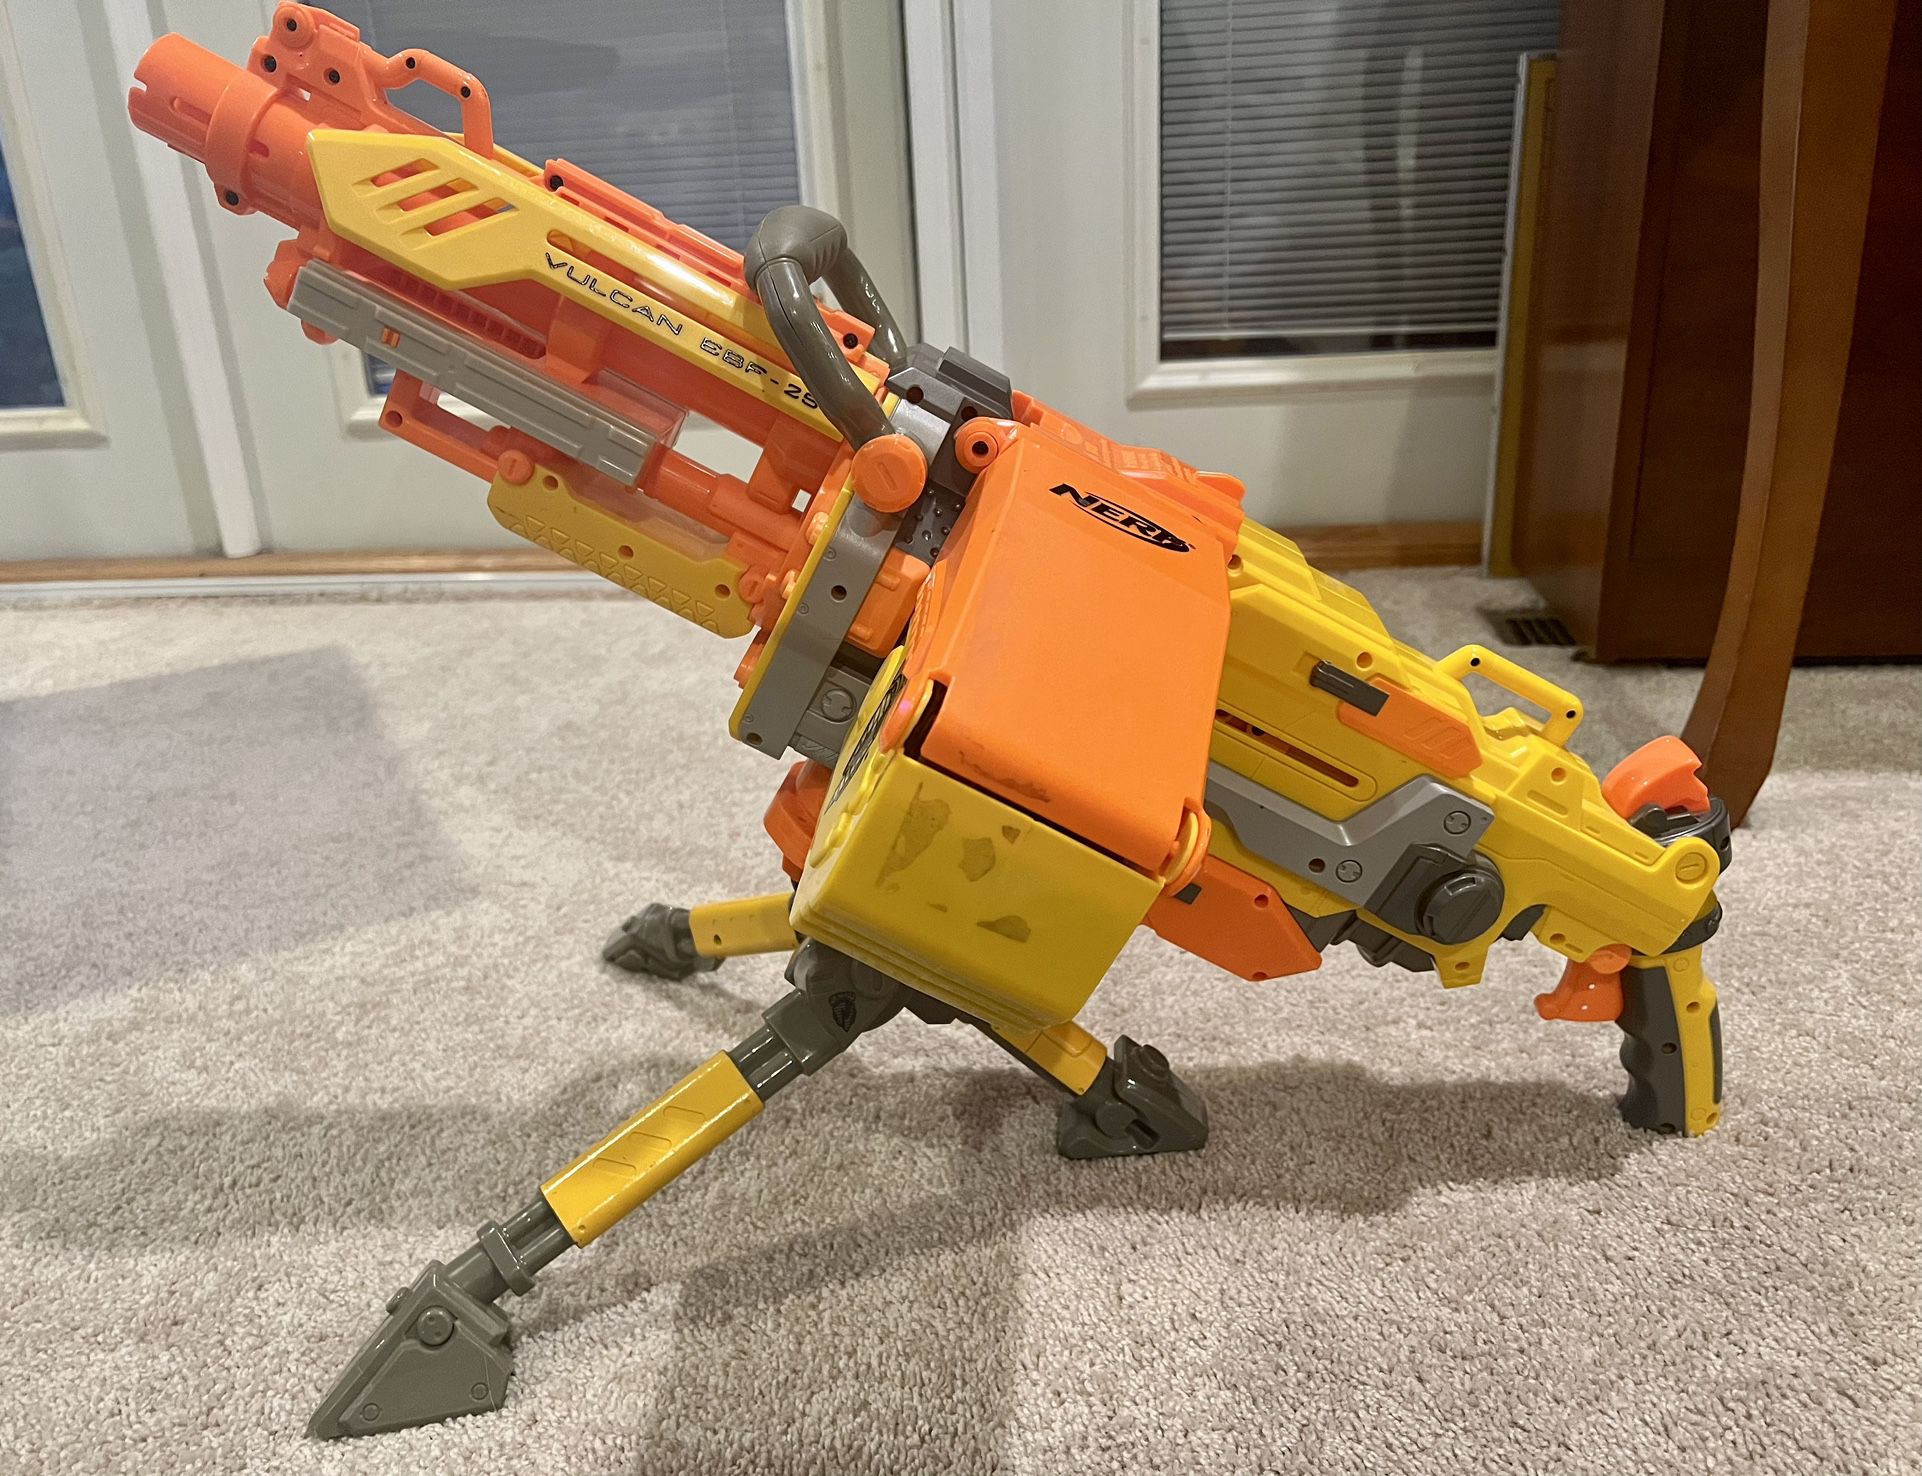 Nerf Vulcan EBF-25 Complete Gun With Ammo Box and One Ammo Belt Tripod Included